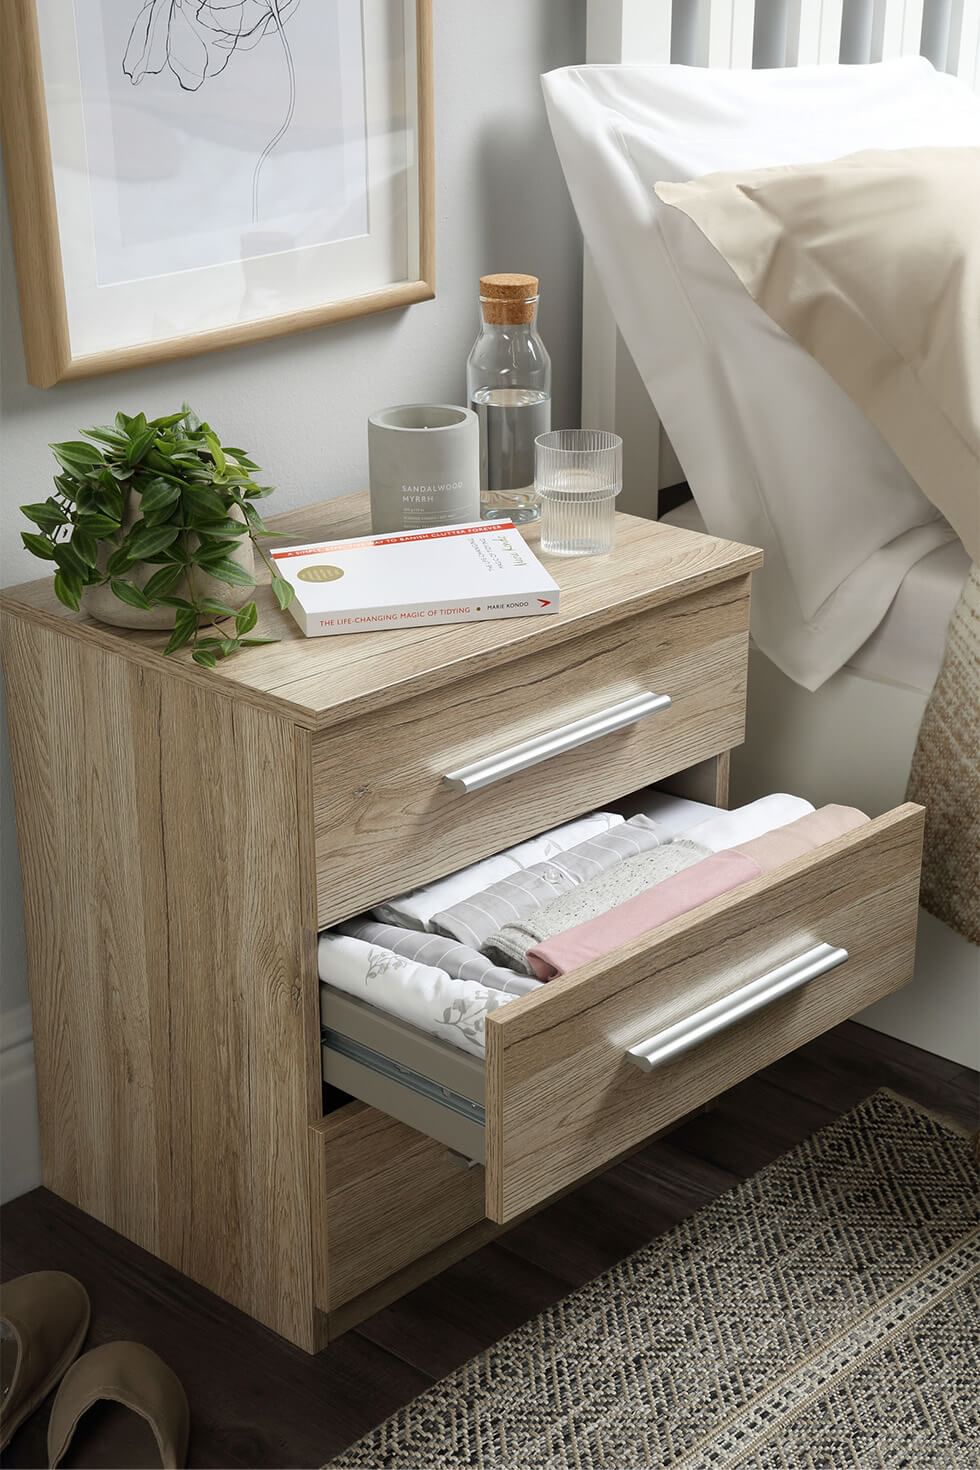 A wooden bedside table with clothes folded in Marie Kondo's Konmari method